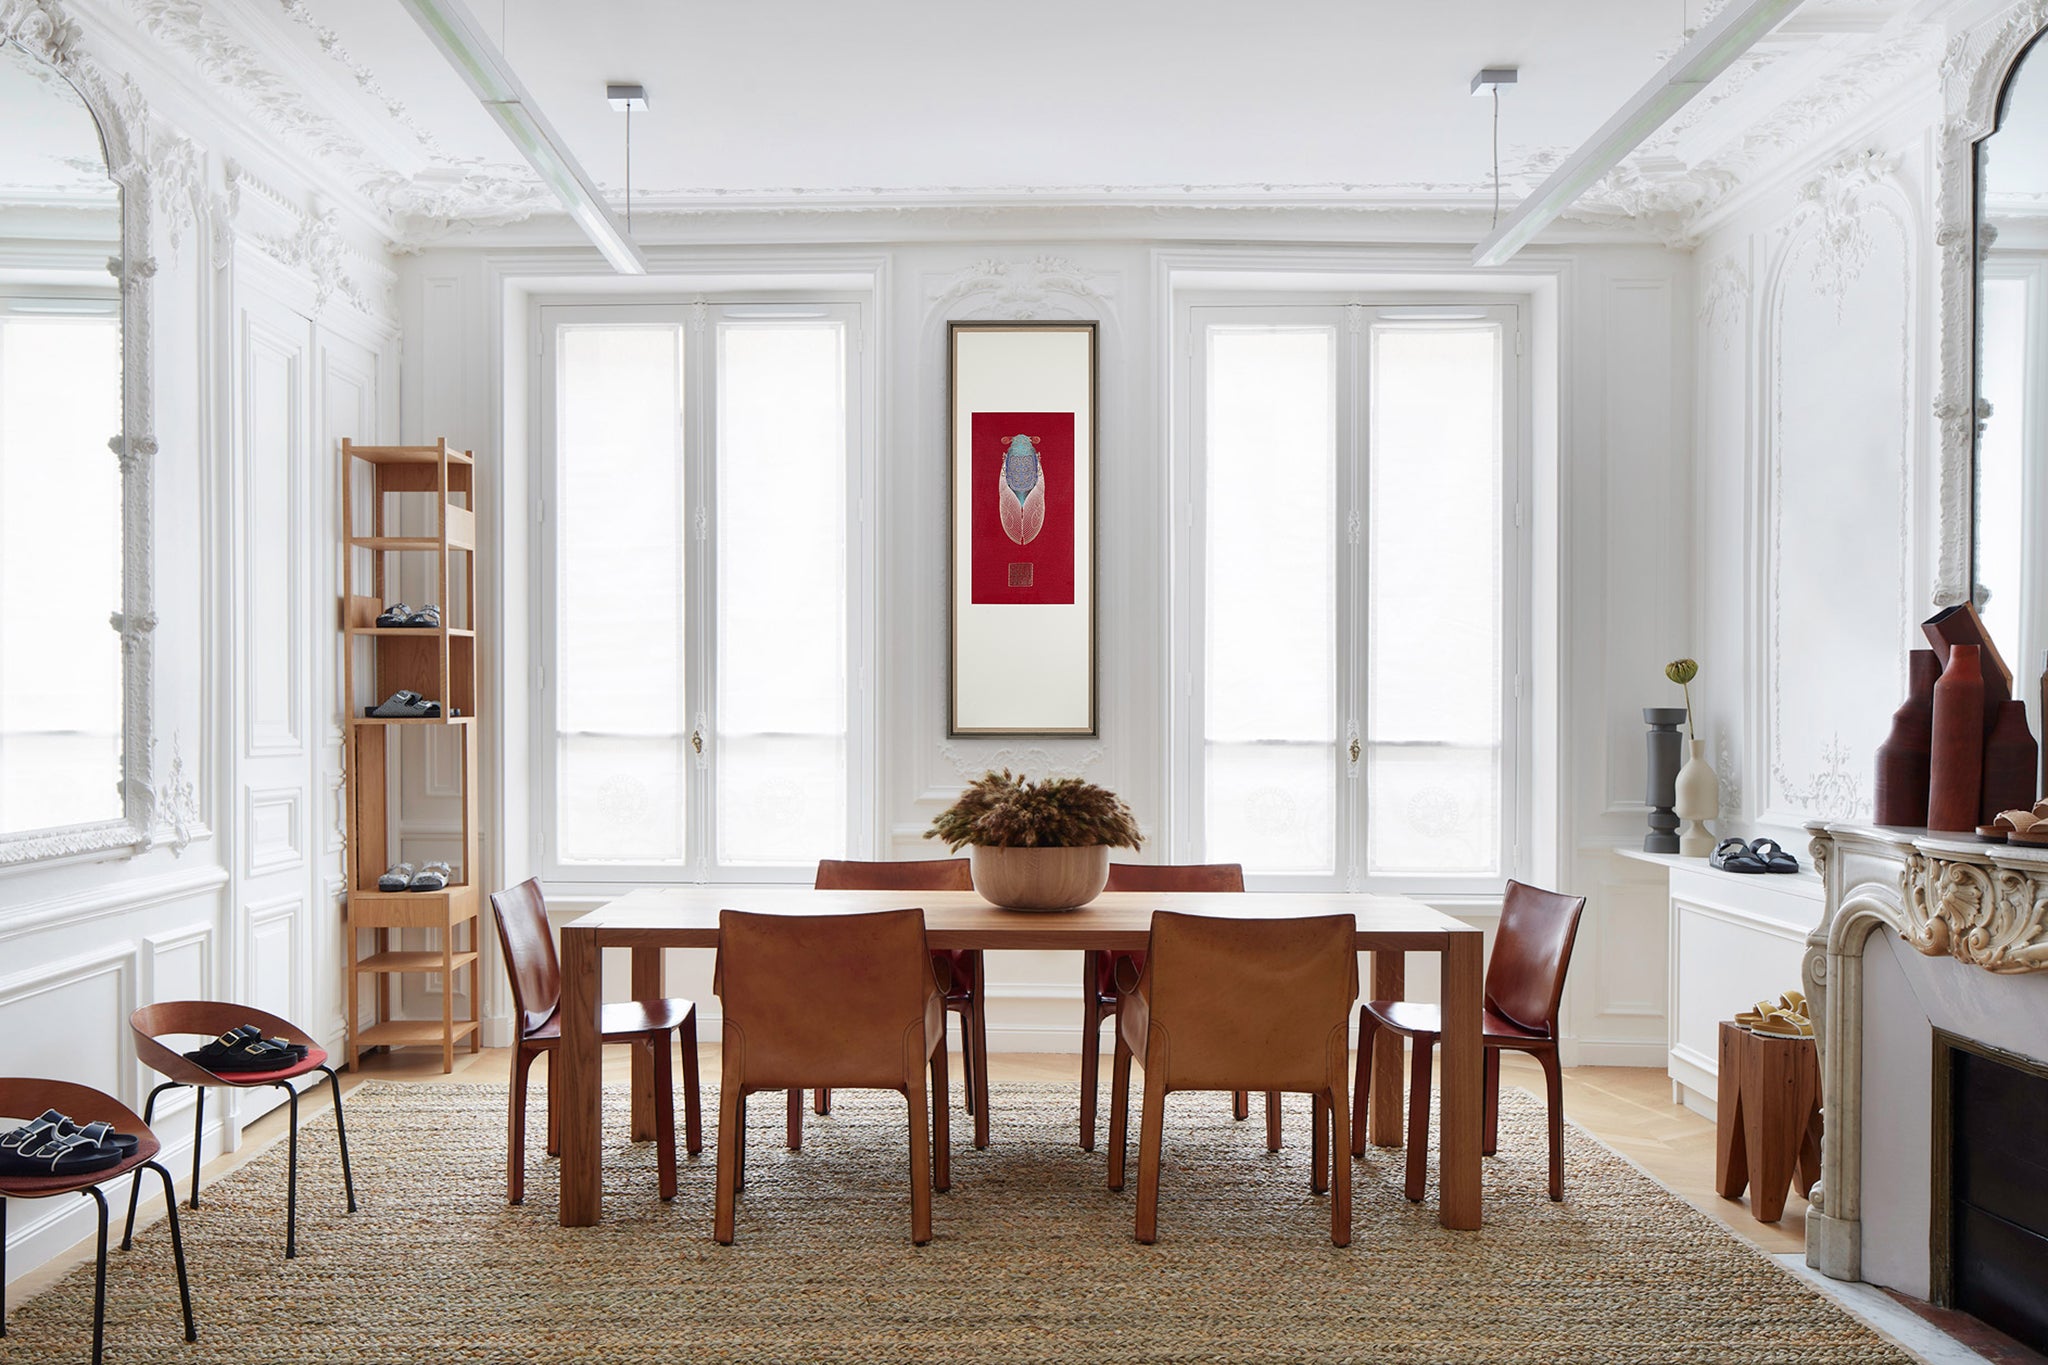 A modern dining room with a large table and chairs. A framed embroidery artwork featuring a cicada design hangs on the wall, adding a touch of elegance to the space.